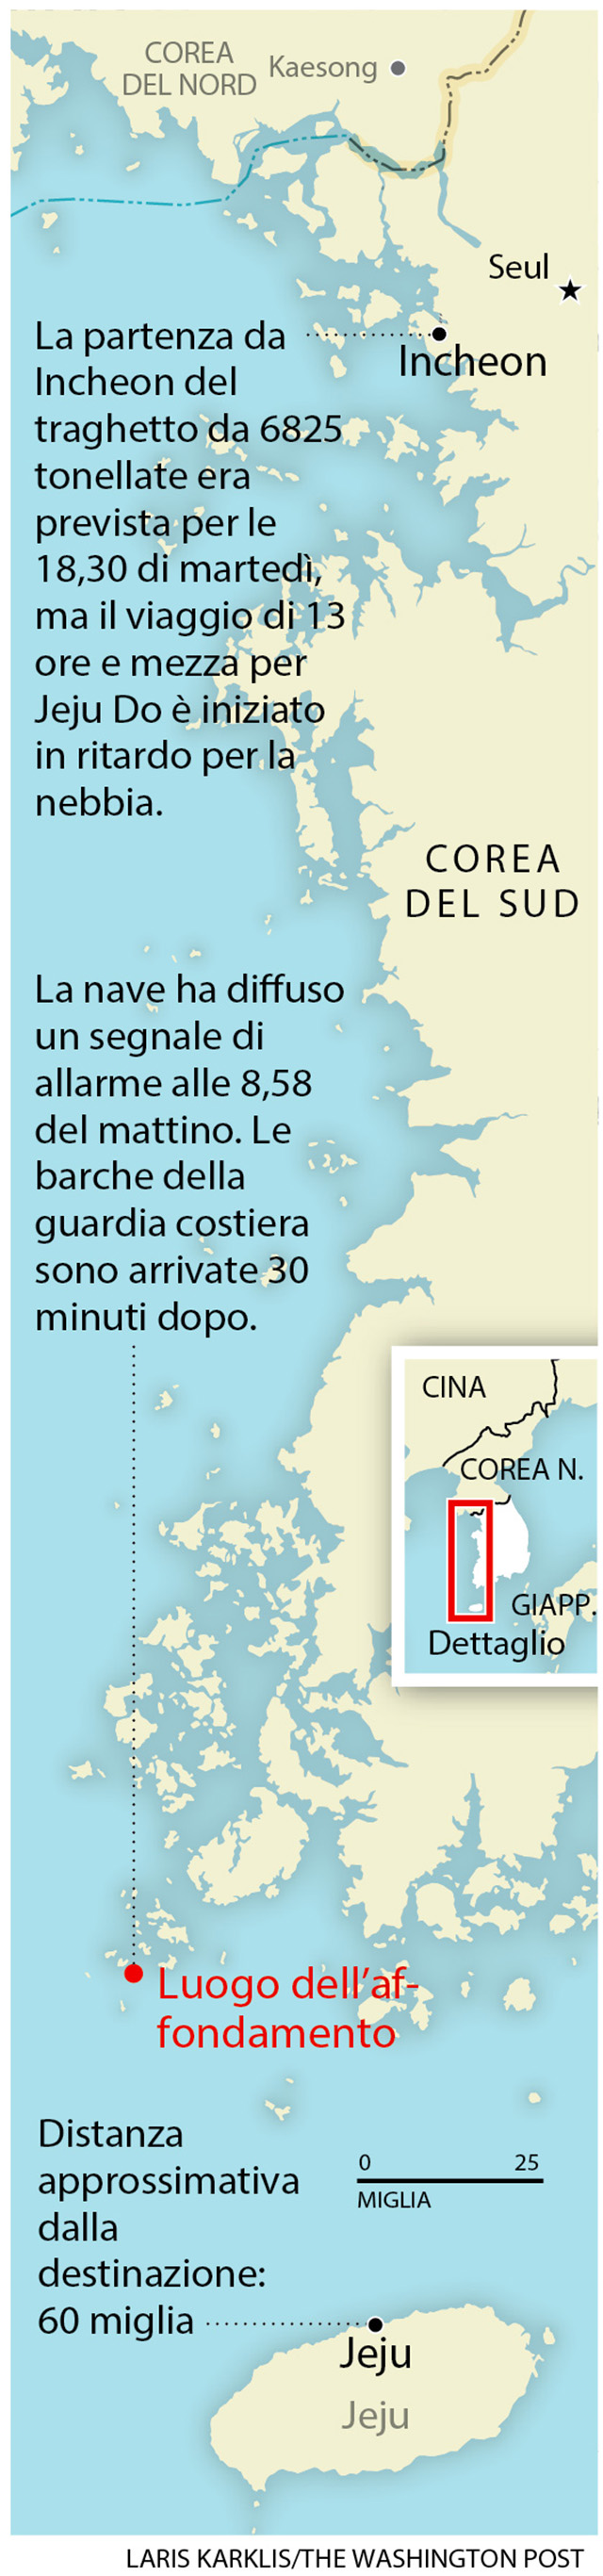 A map locating where the South Korean ferry, Sewol capsized.